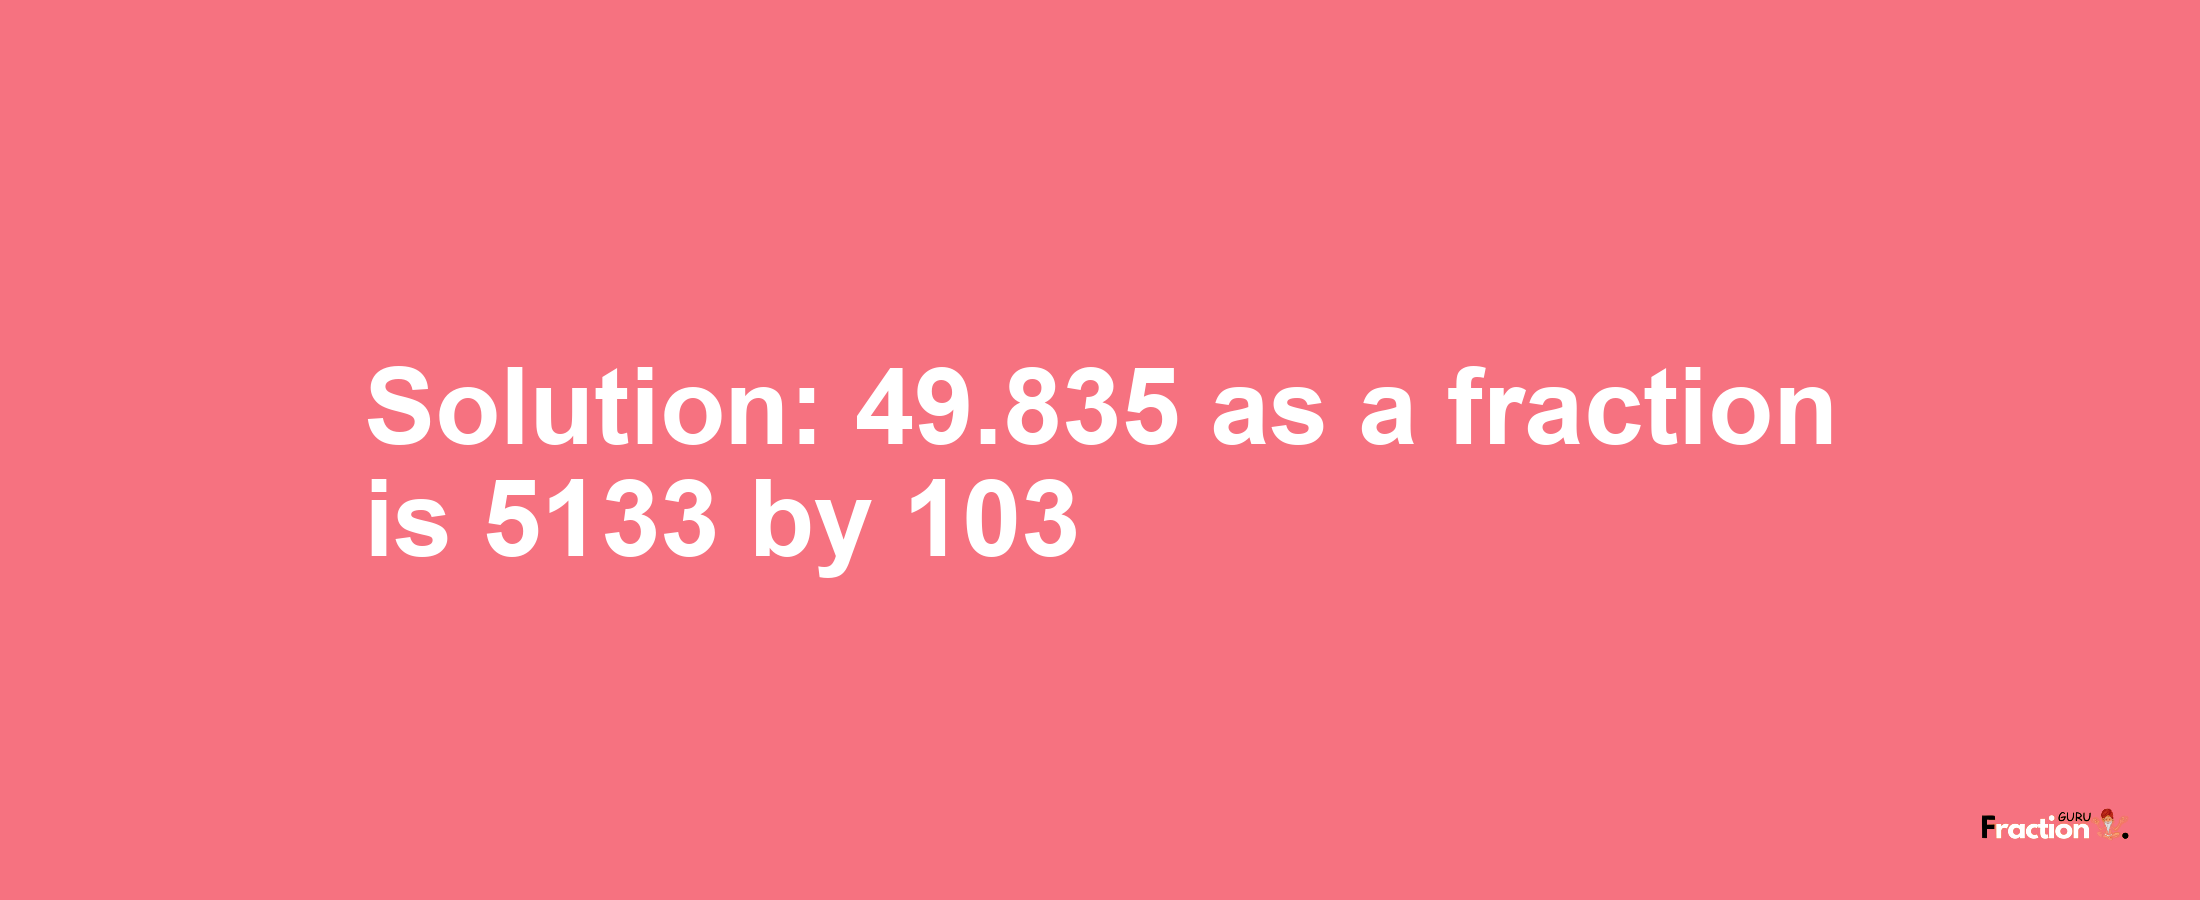 Solution:49.835 as a fraction is 5133/103